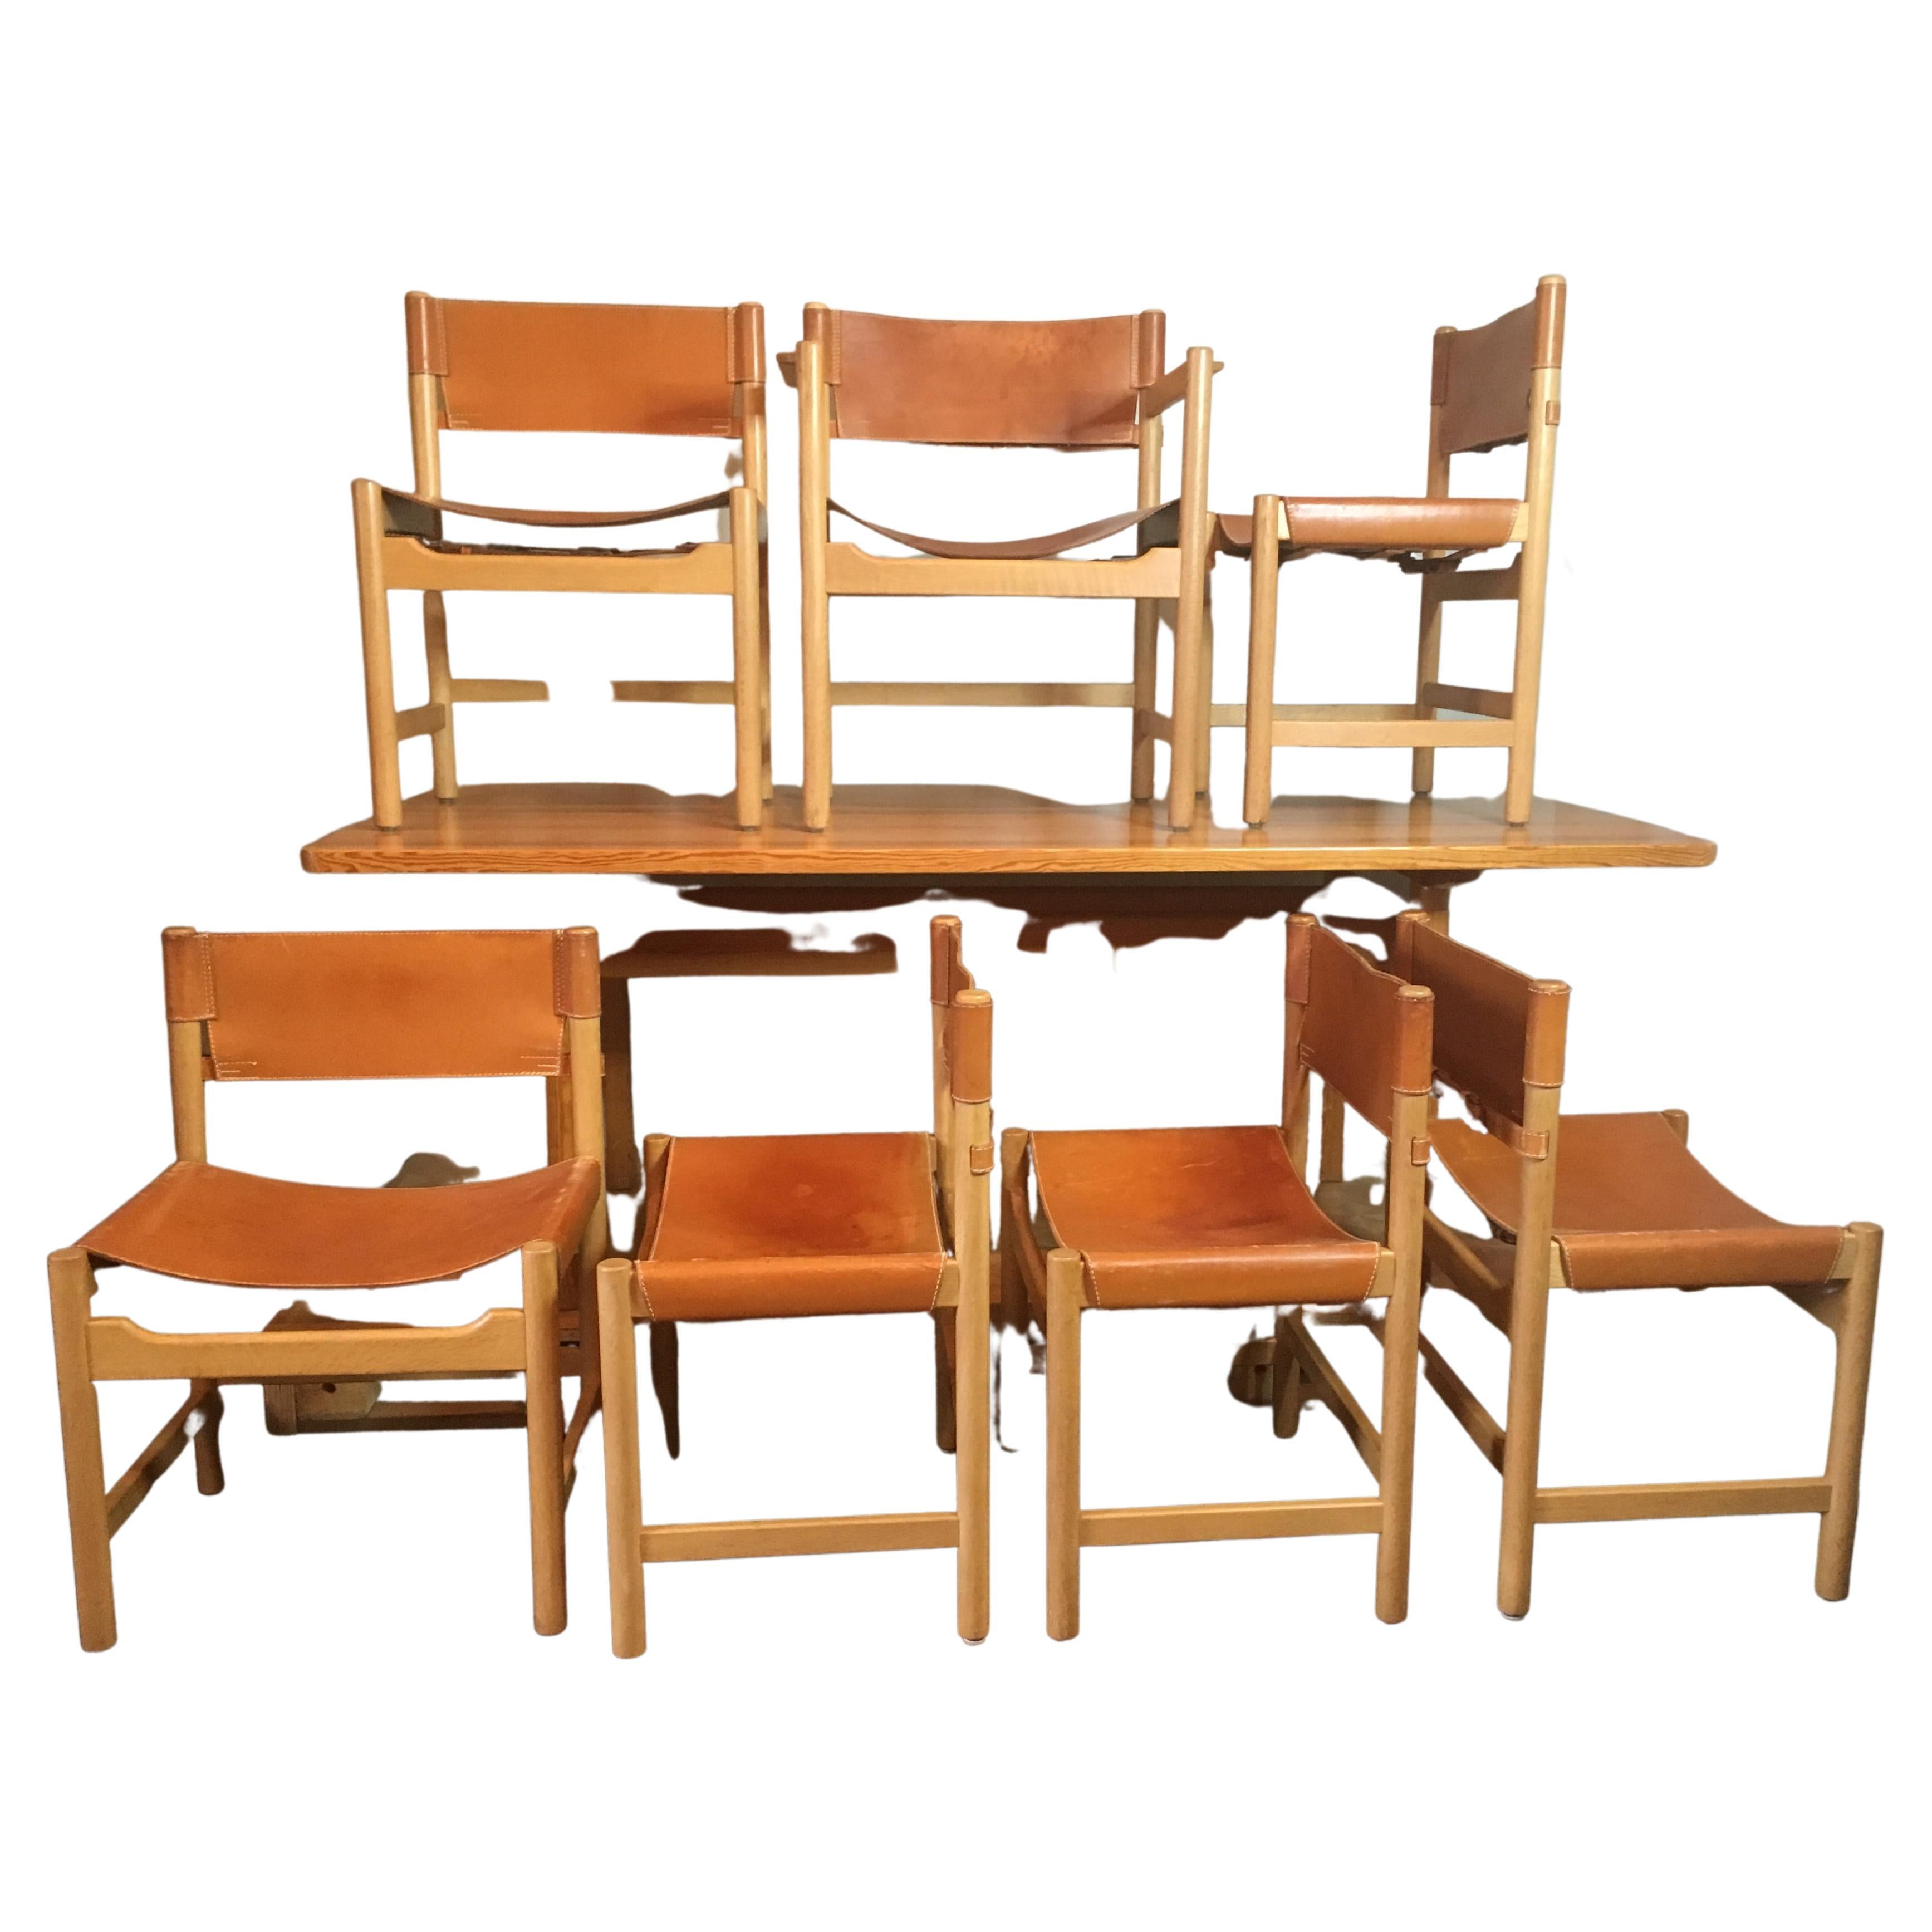 Børge Mogensen Vintage Pine Dining Table & 8 - Chairs / Frederica Furniture